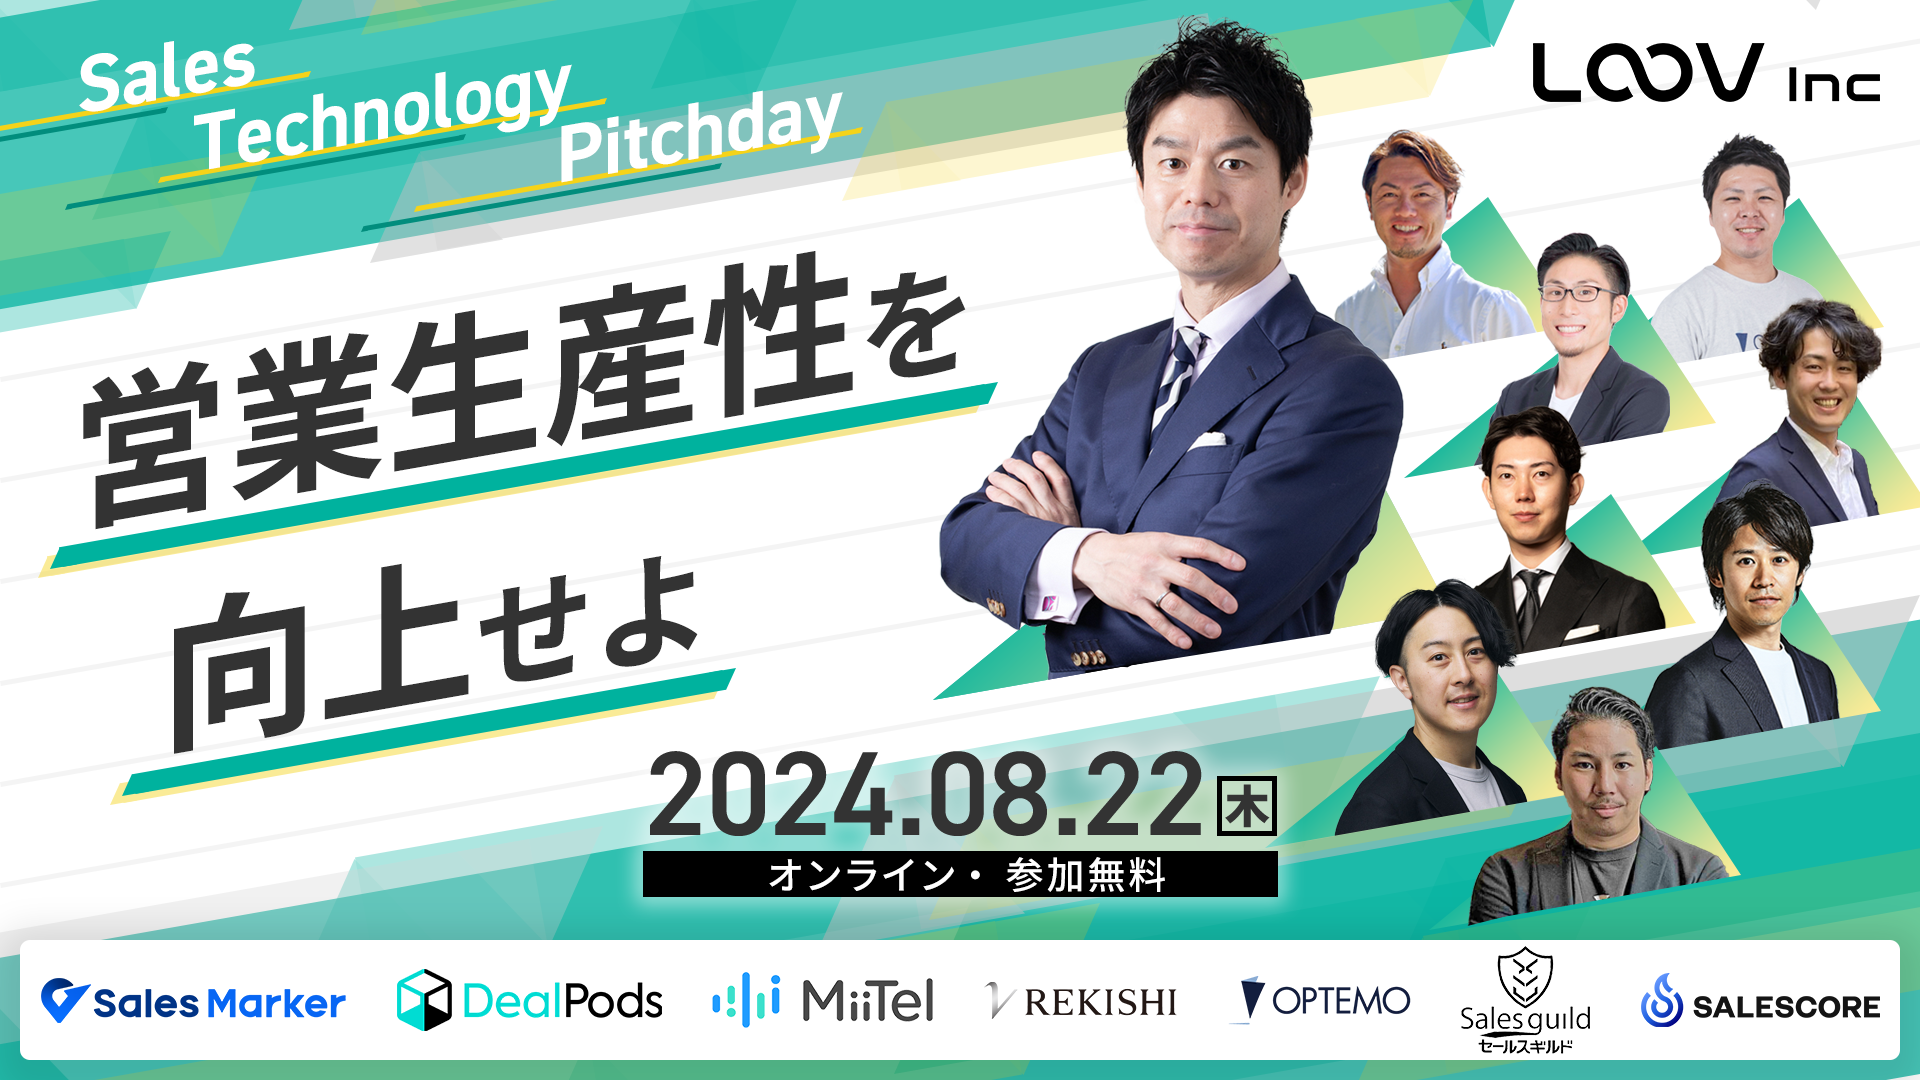 Sales Technology Pitchday IcƐYス^822i؁jod